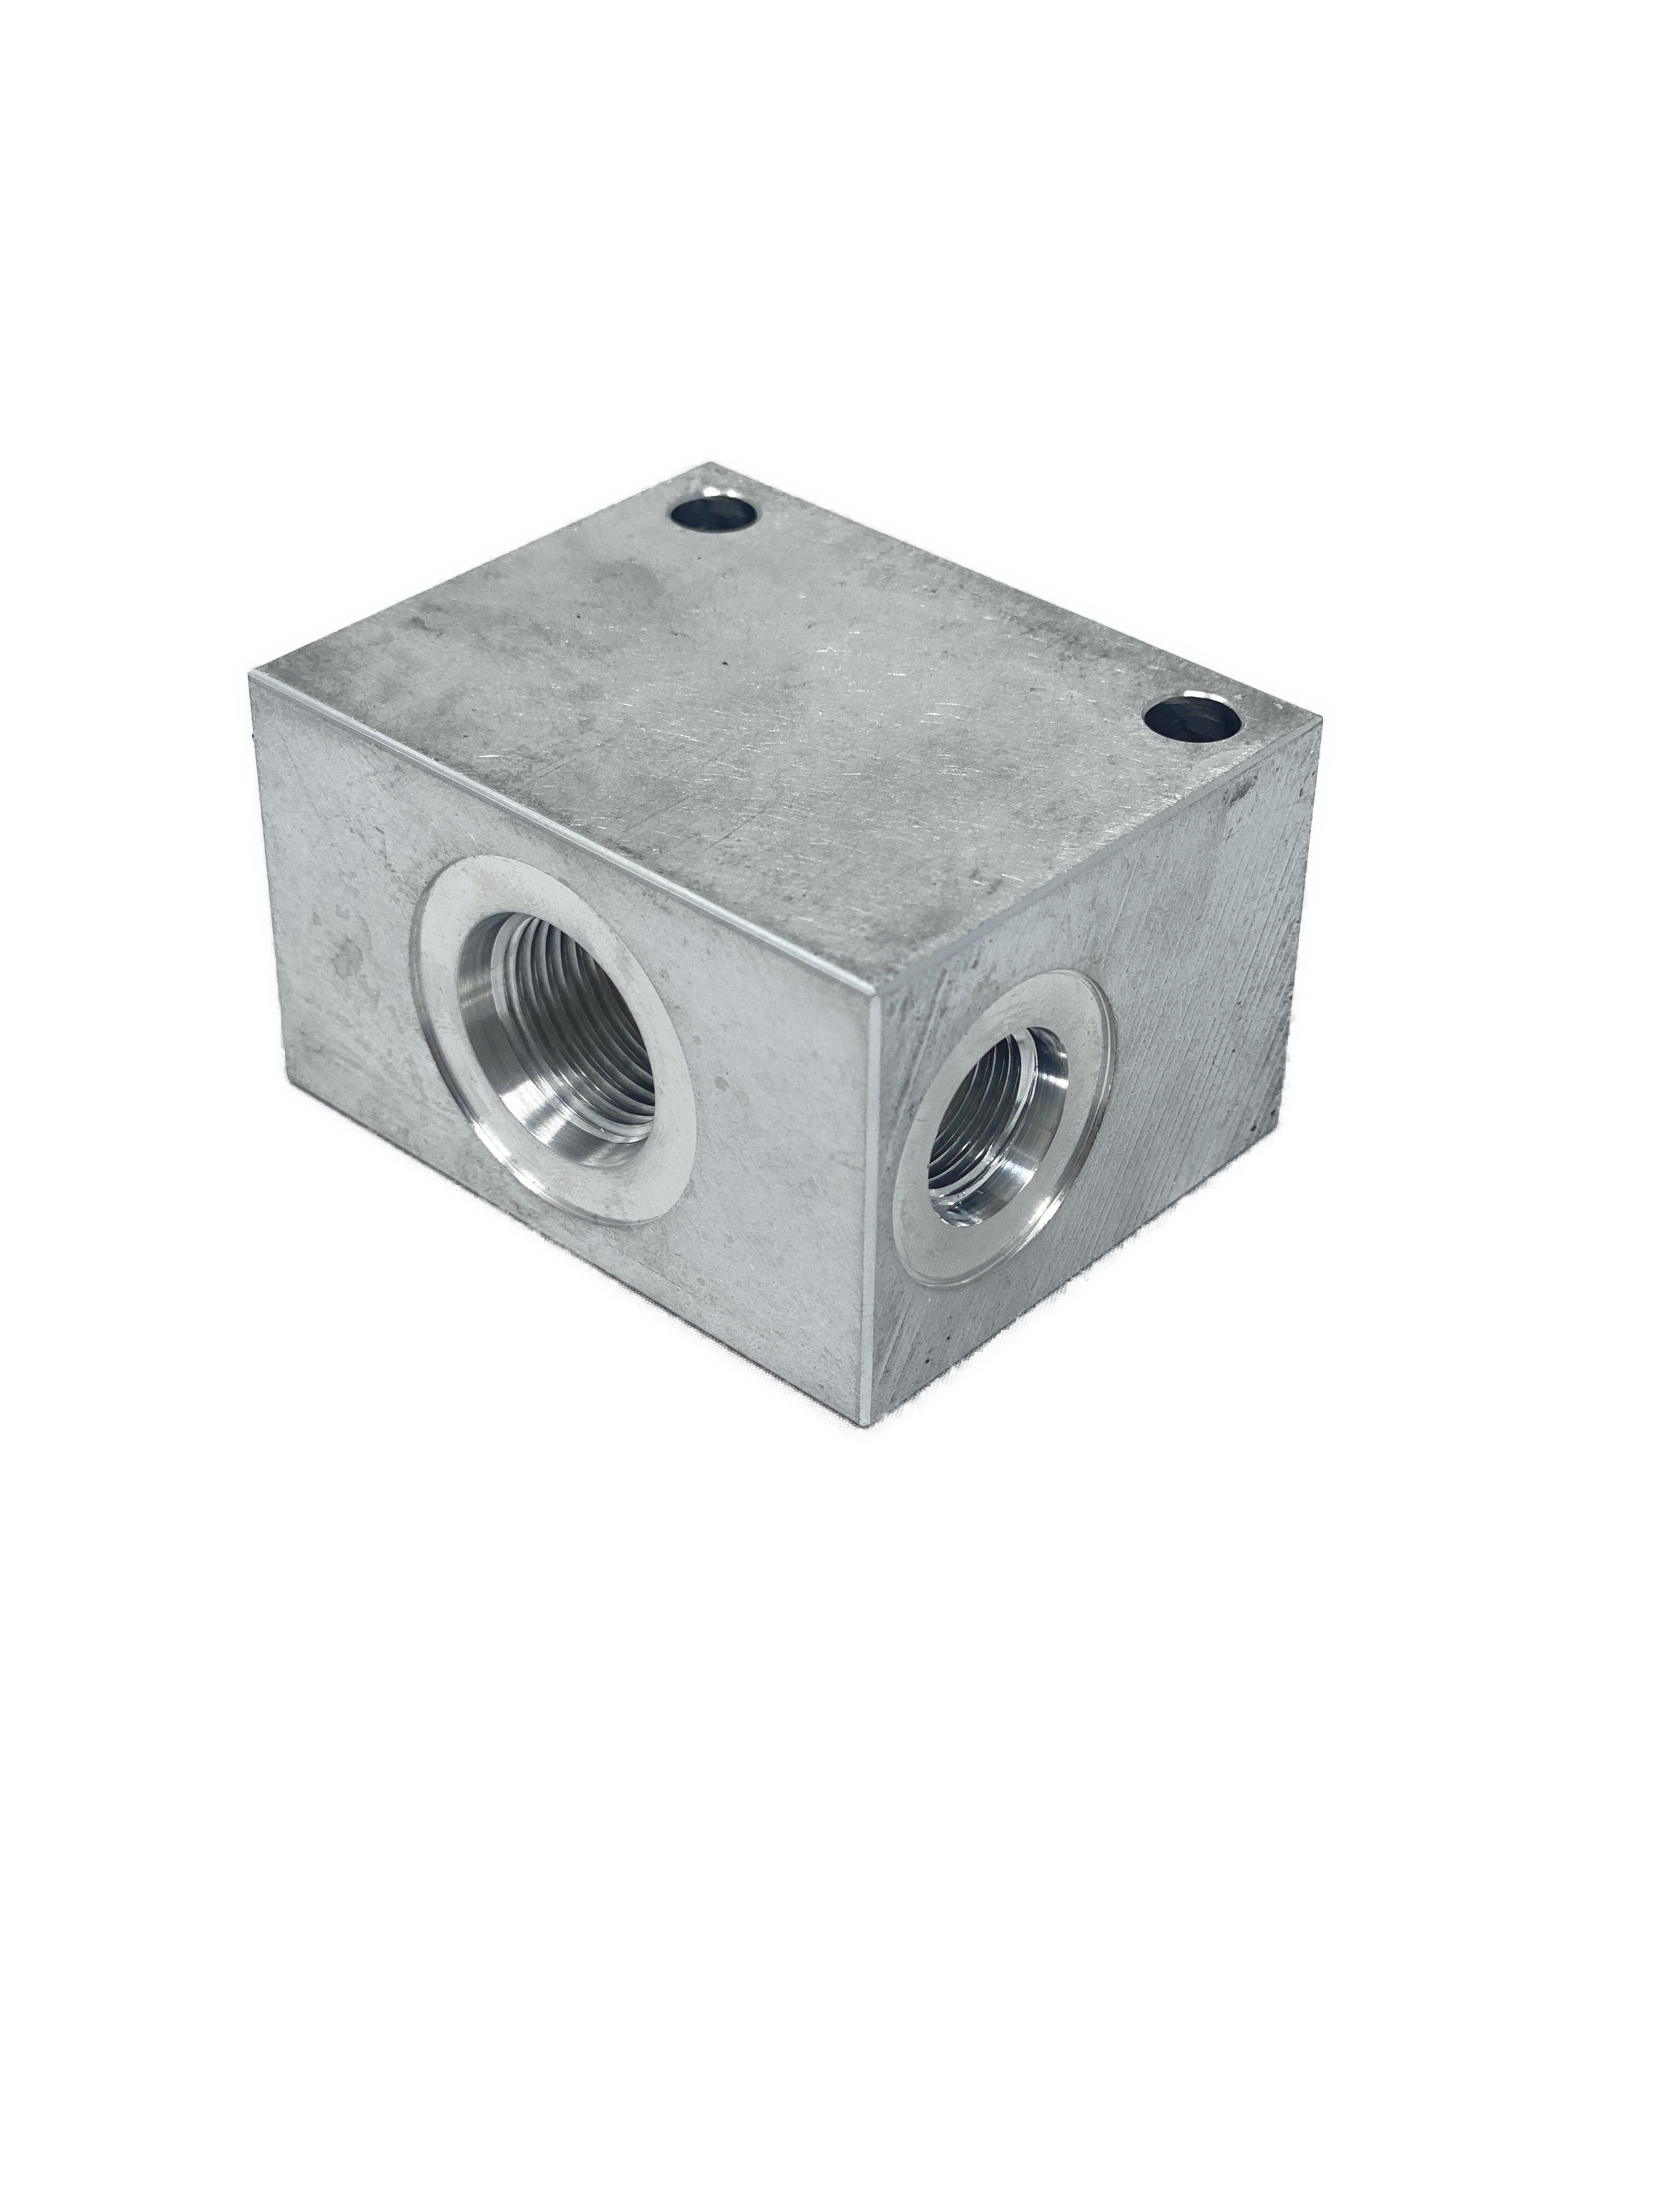 AC102CB8S : Daman Common Cavity Body, C-10-2 Cartridge Cavity, #8 SAE (1/2") Port Connections, 3000psi Rated, Aluminum, Without Gauge Port